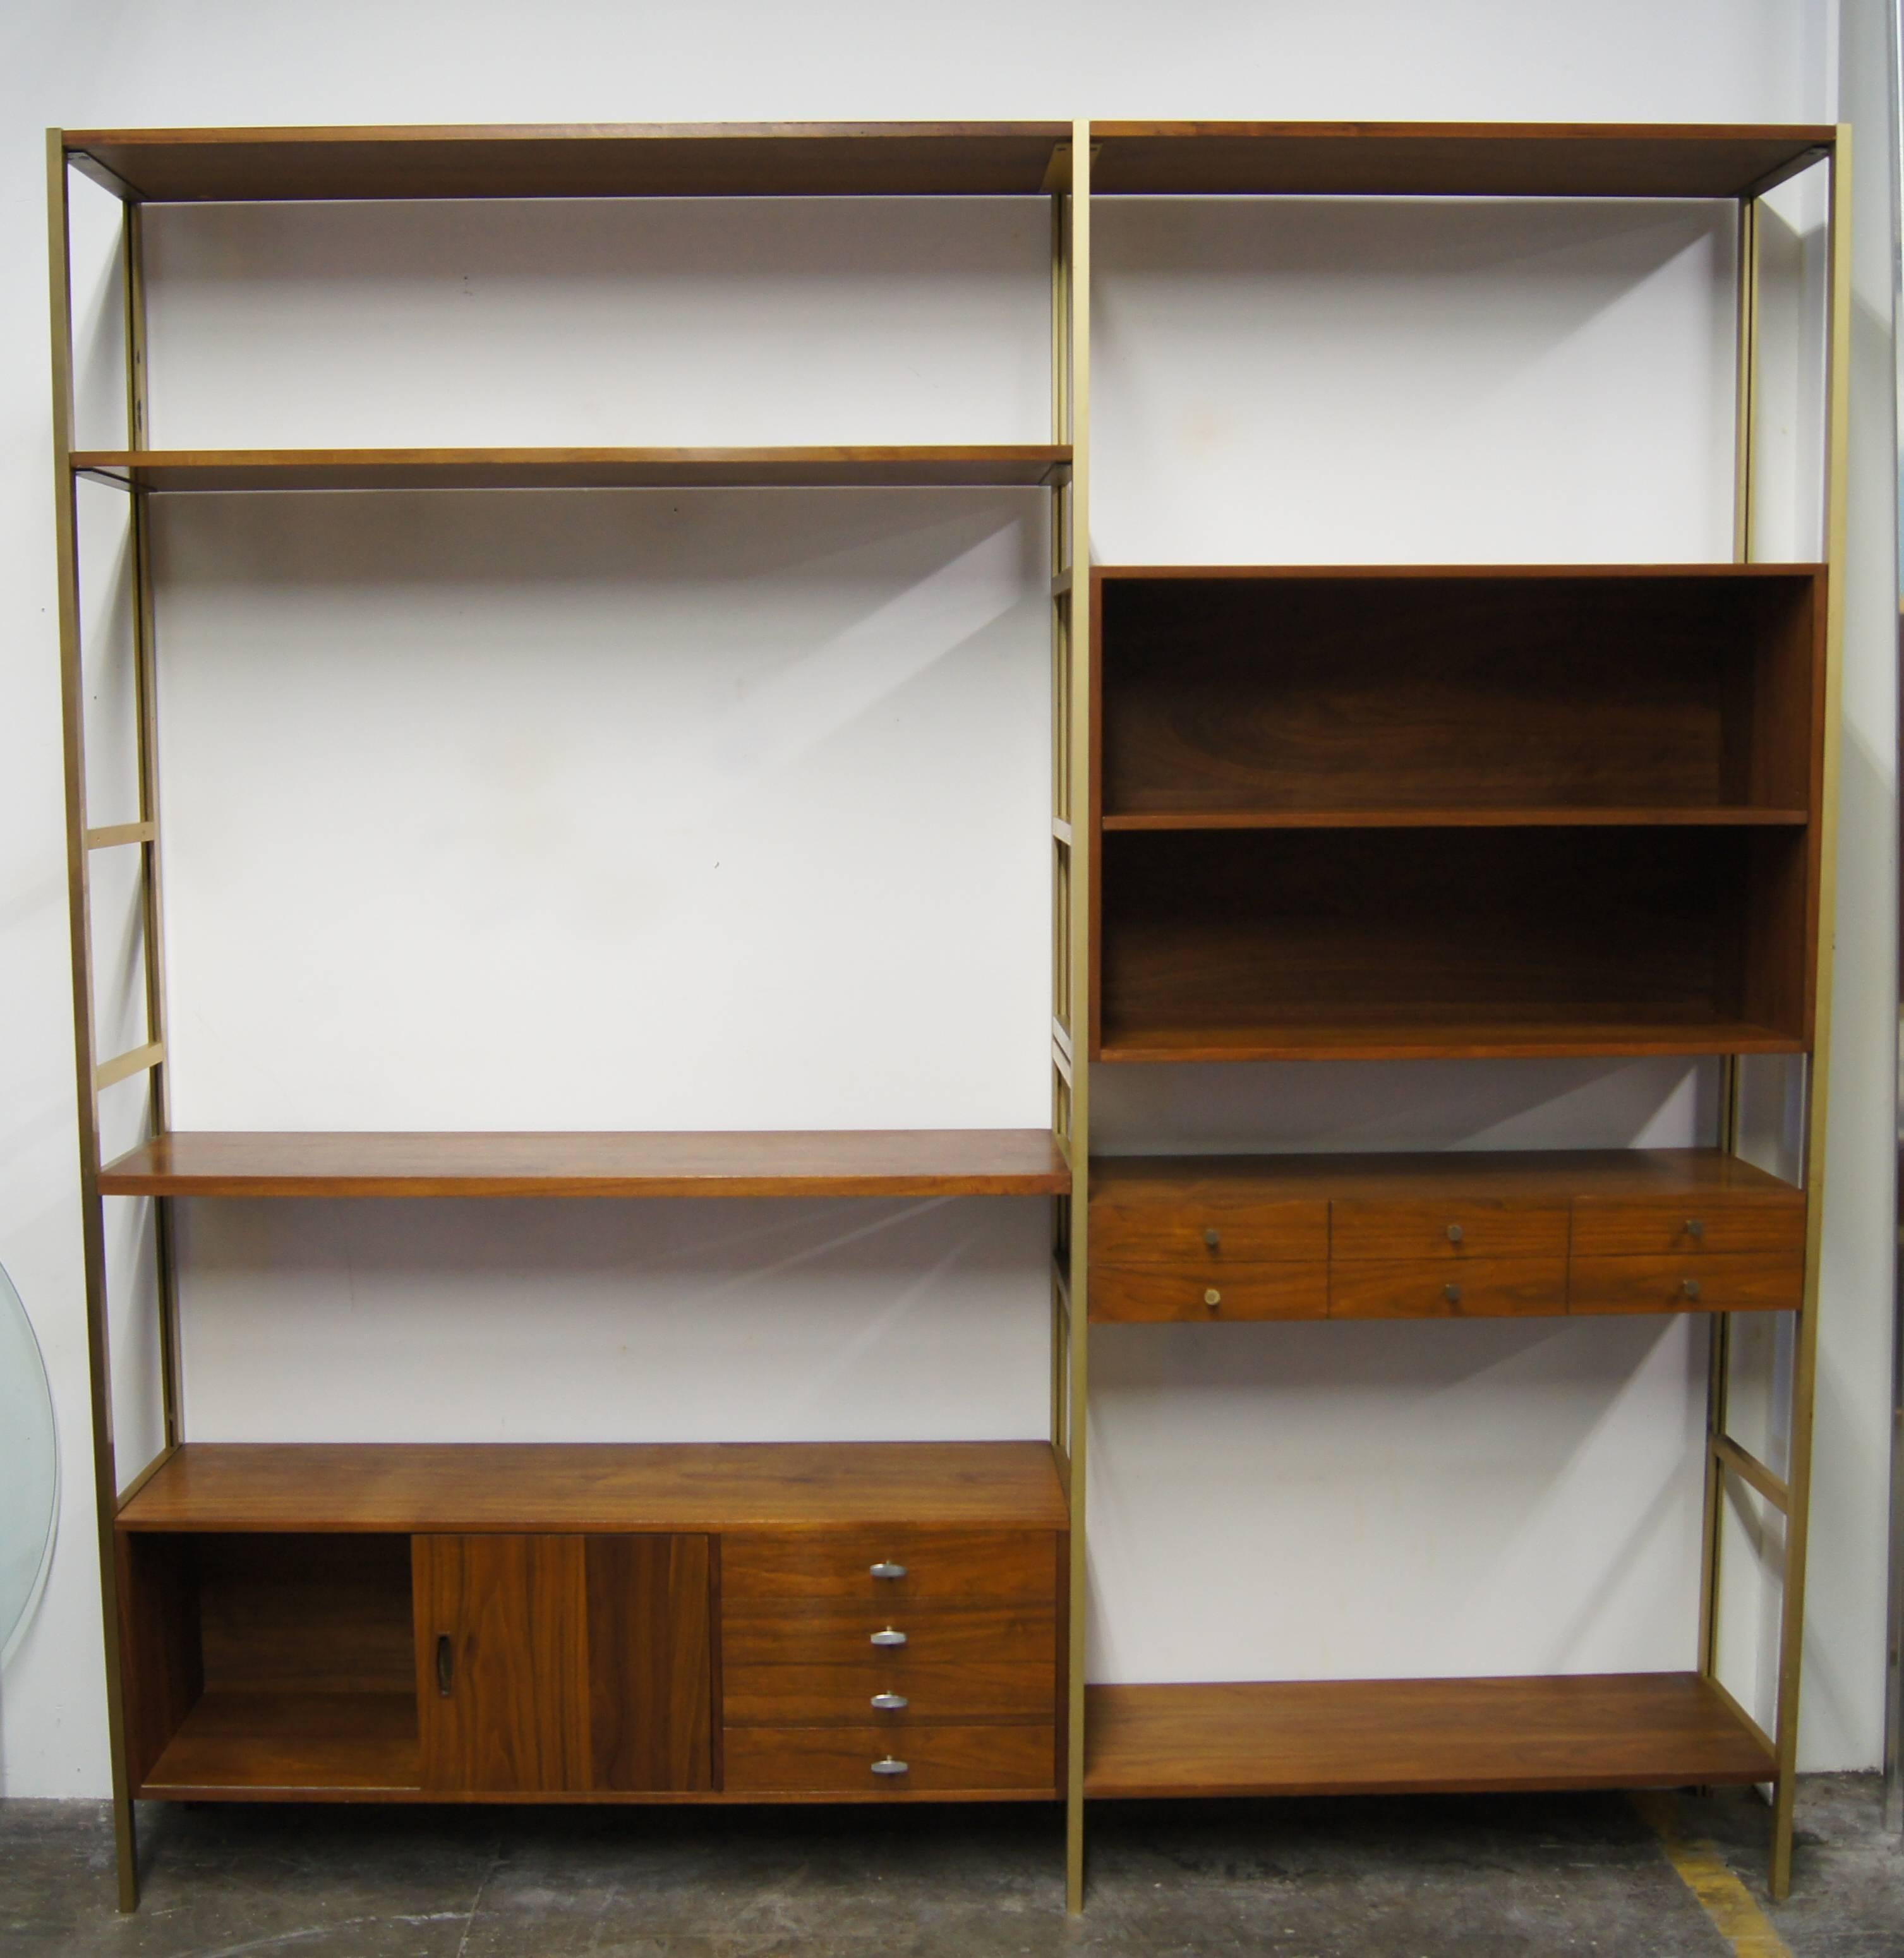 This one-of-a-kind wall unit was custom-made for Herb Sacks by H Sacks & Sons in Brookline, MA. It features a brass frame with numerous walnut shelves and storage components, including a small component with six drawers and a larger section with